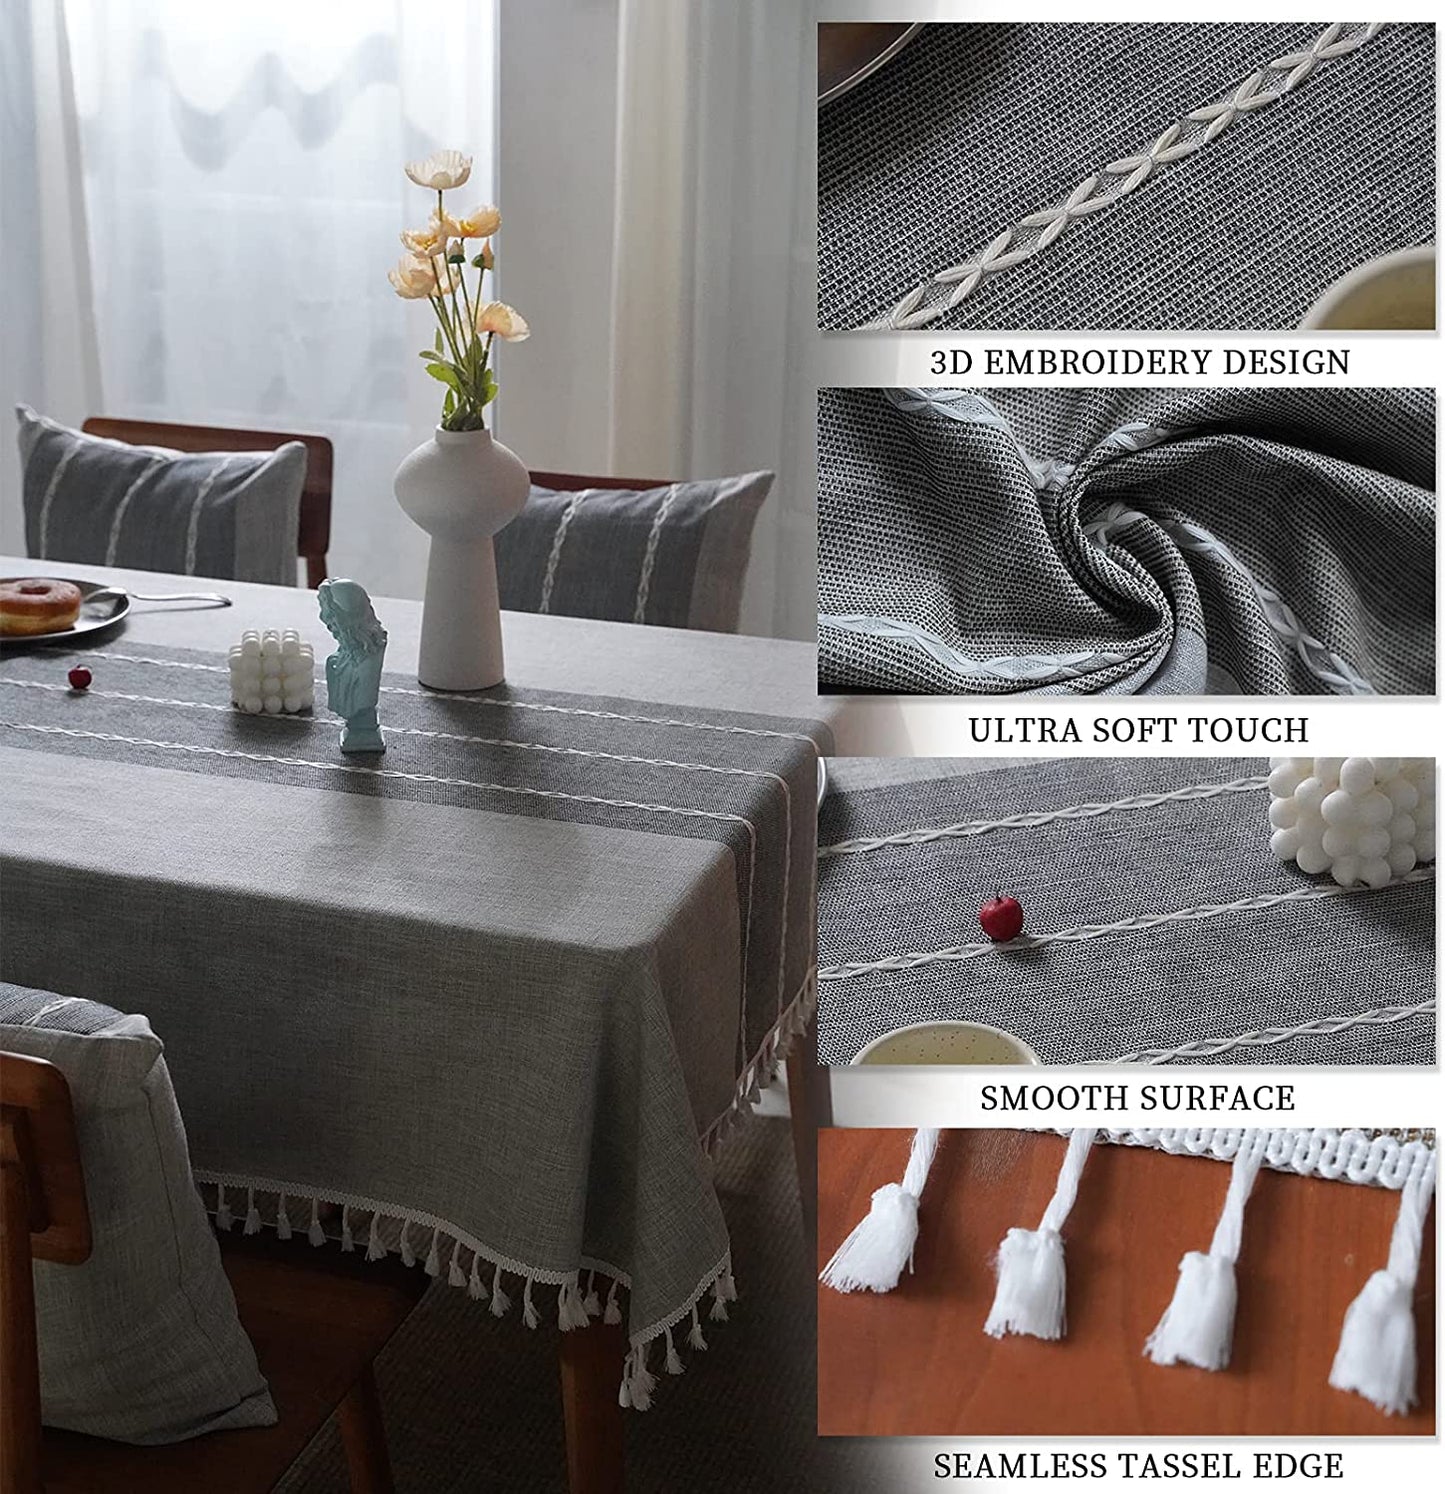 Mokani Middle Embroidery Table Cloth Washable Cotton Linen Tassel Tablecloth, Rectangle Wrinkle Free Anti-Fading Table Cover for Kitchen Dinning Thanksgiving Christmas (55 x 102 Inch, Gray) - (For 6 piece(s))